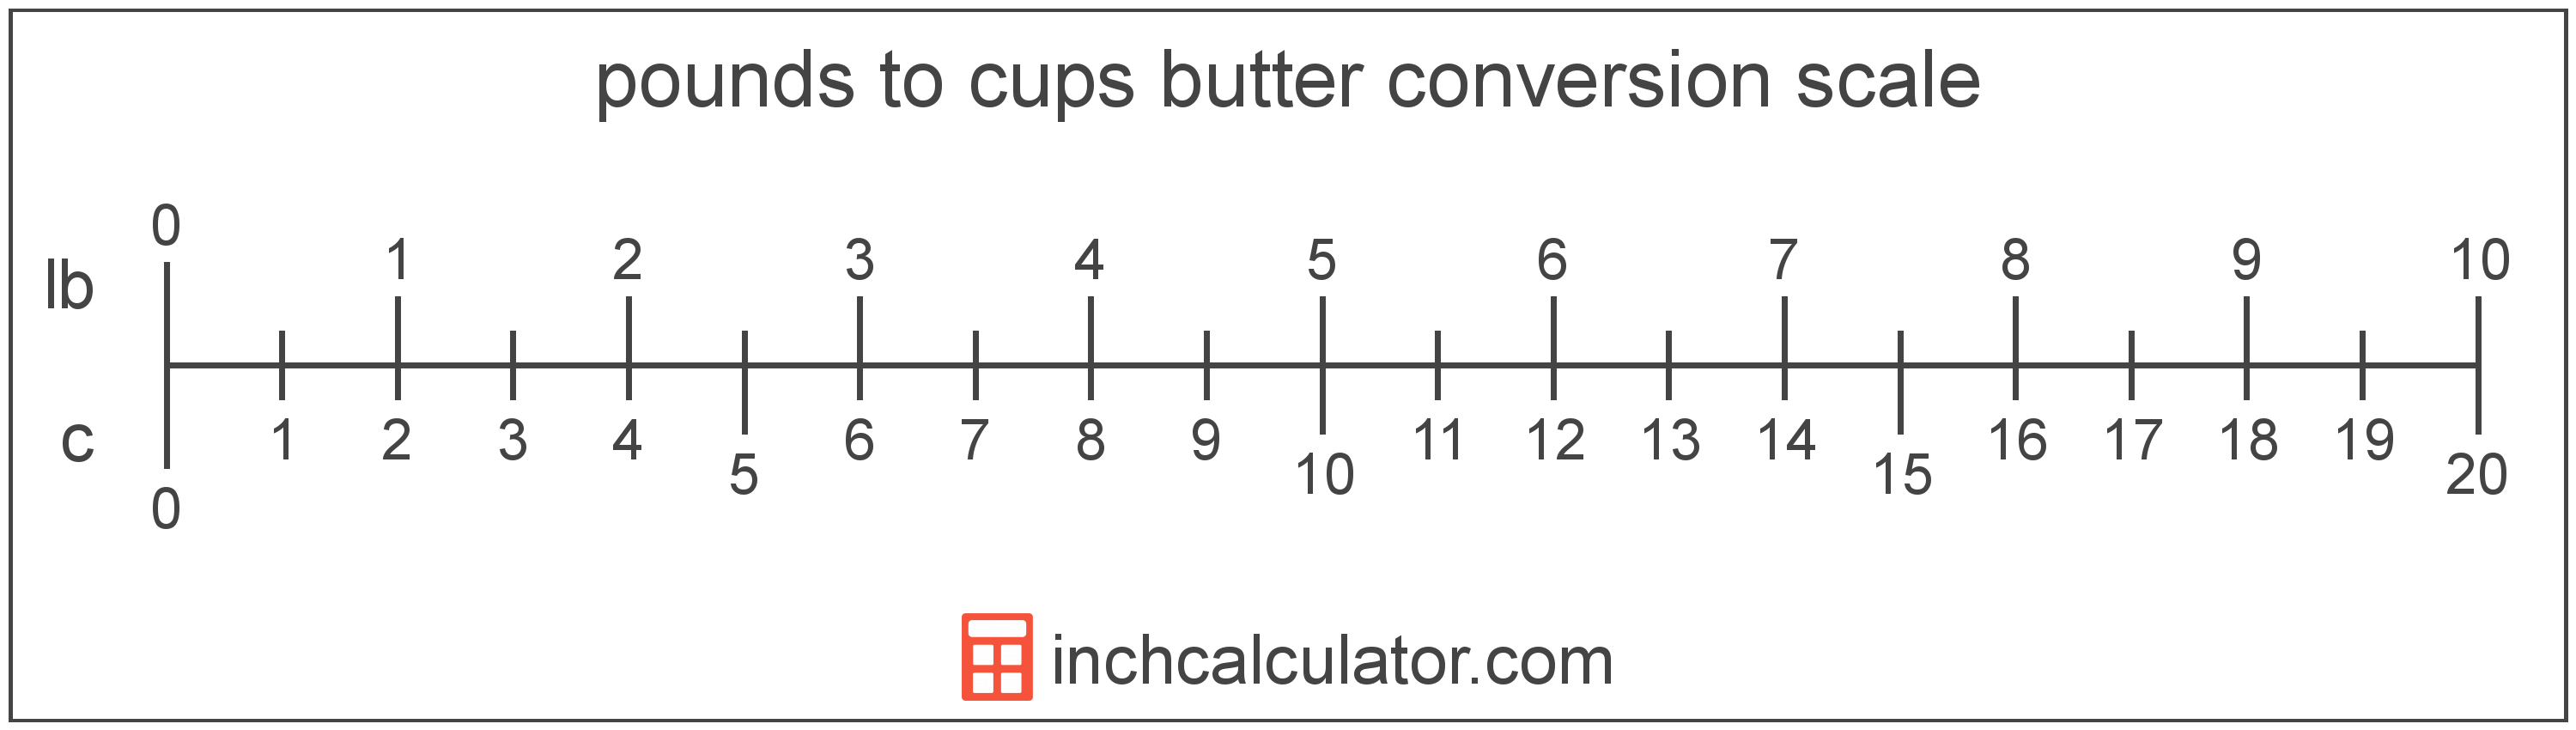 conversion scale showing pounds and equivalent cups butter values